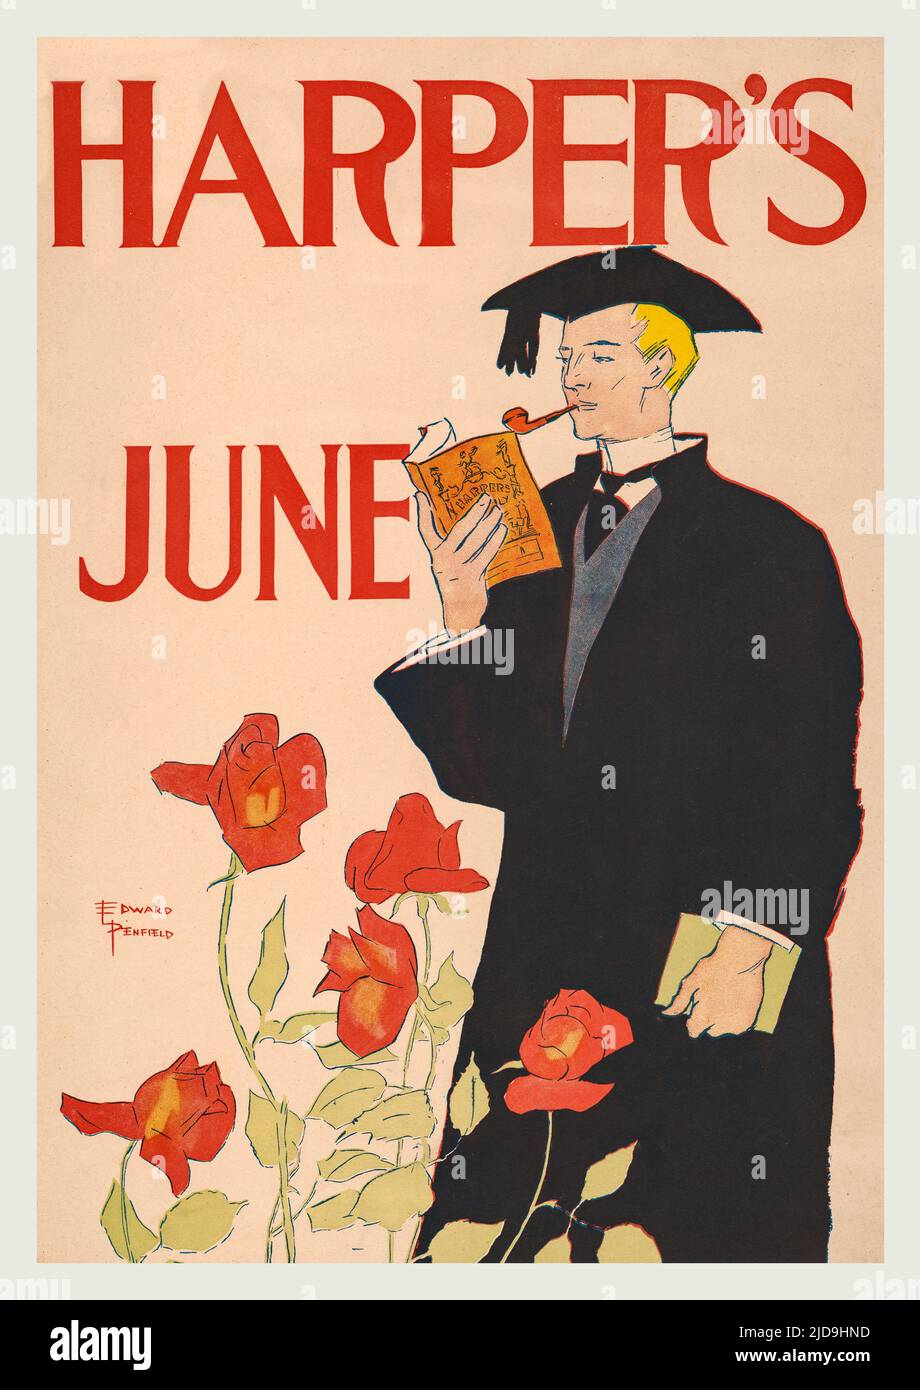 A turn of the 20th century illustration by Edward Penfield (1866-1925) considered by many to be the father of the American poster. Featuring a teacher in gown and mortar board reading. Harper’s Magazine, the oldest general-interest monthly in America. Stock Photo